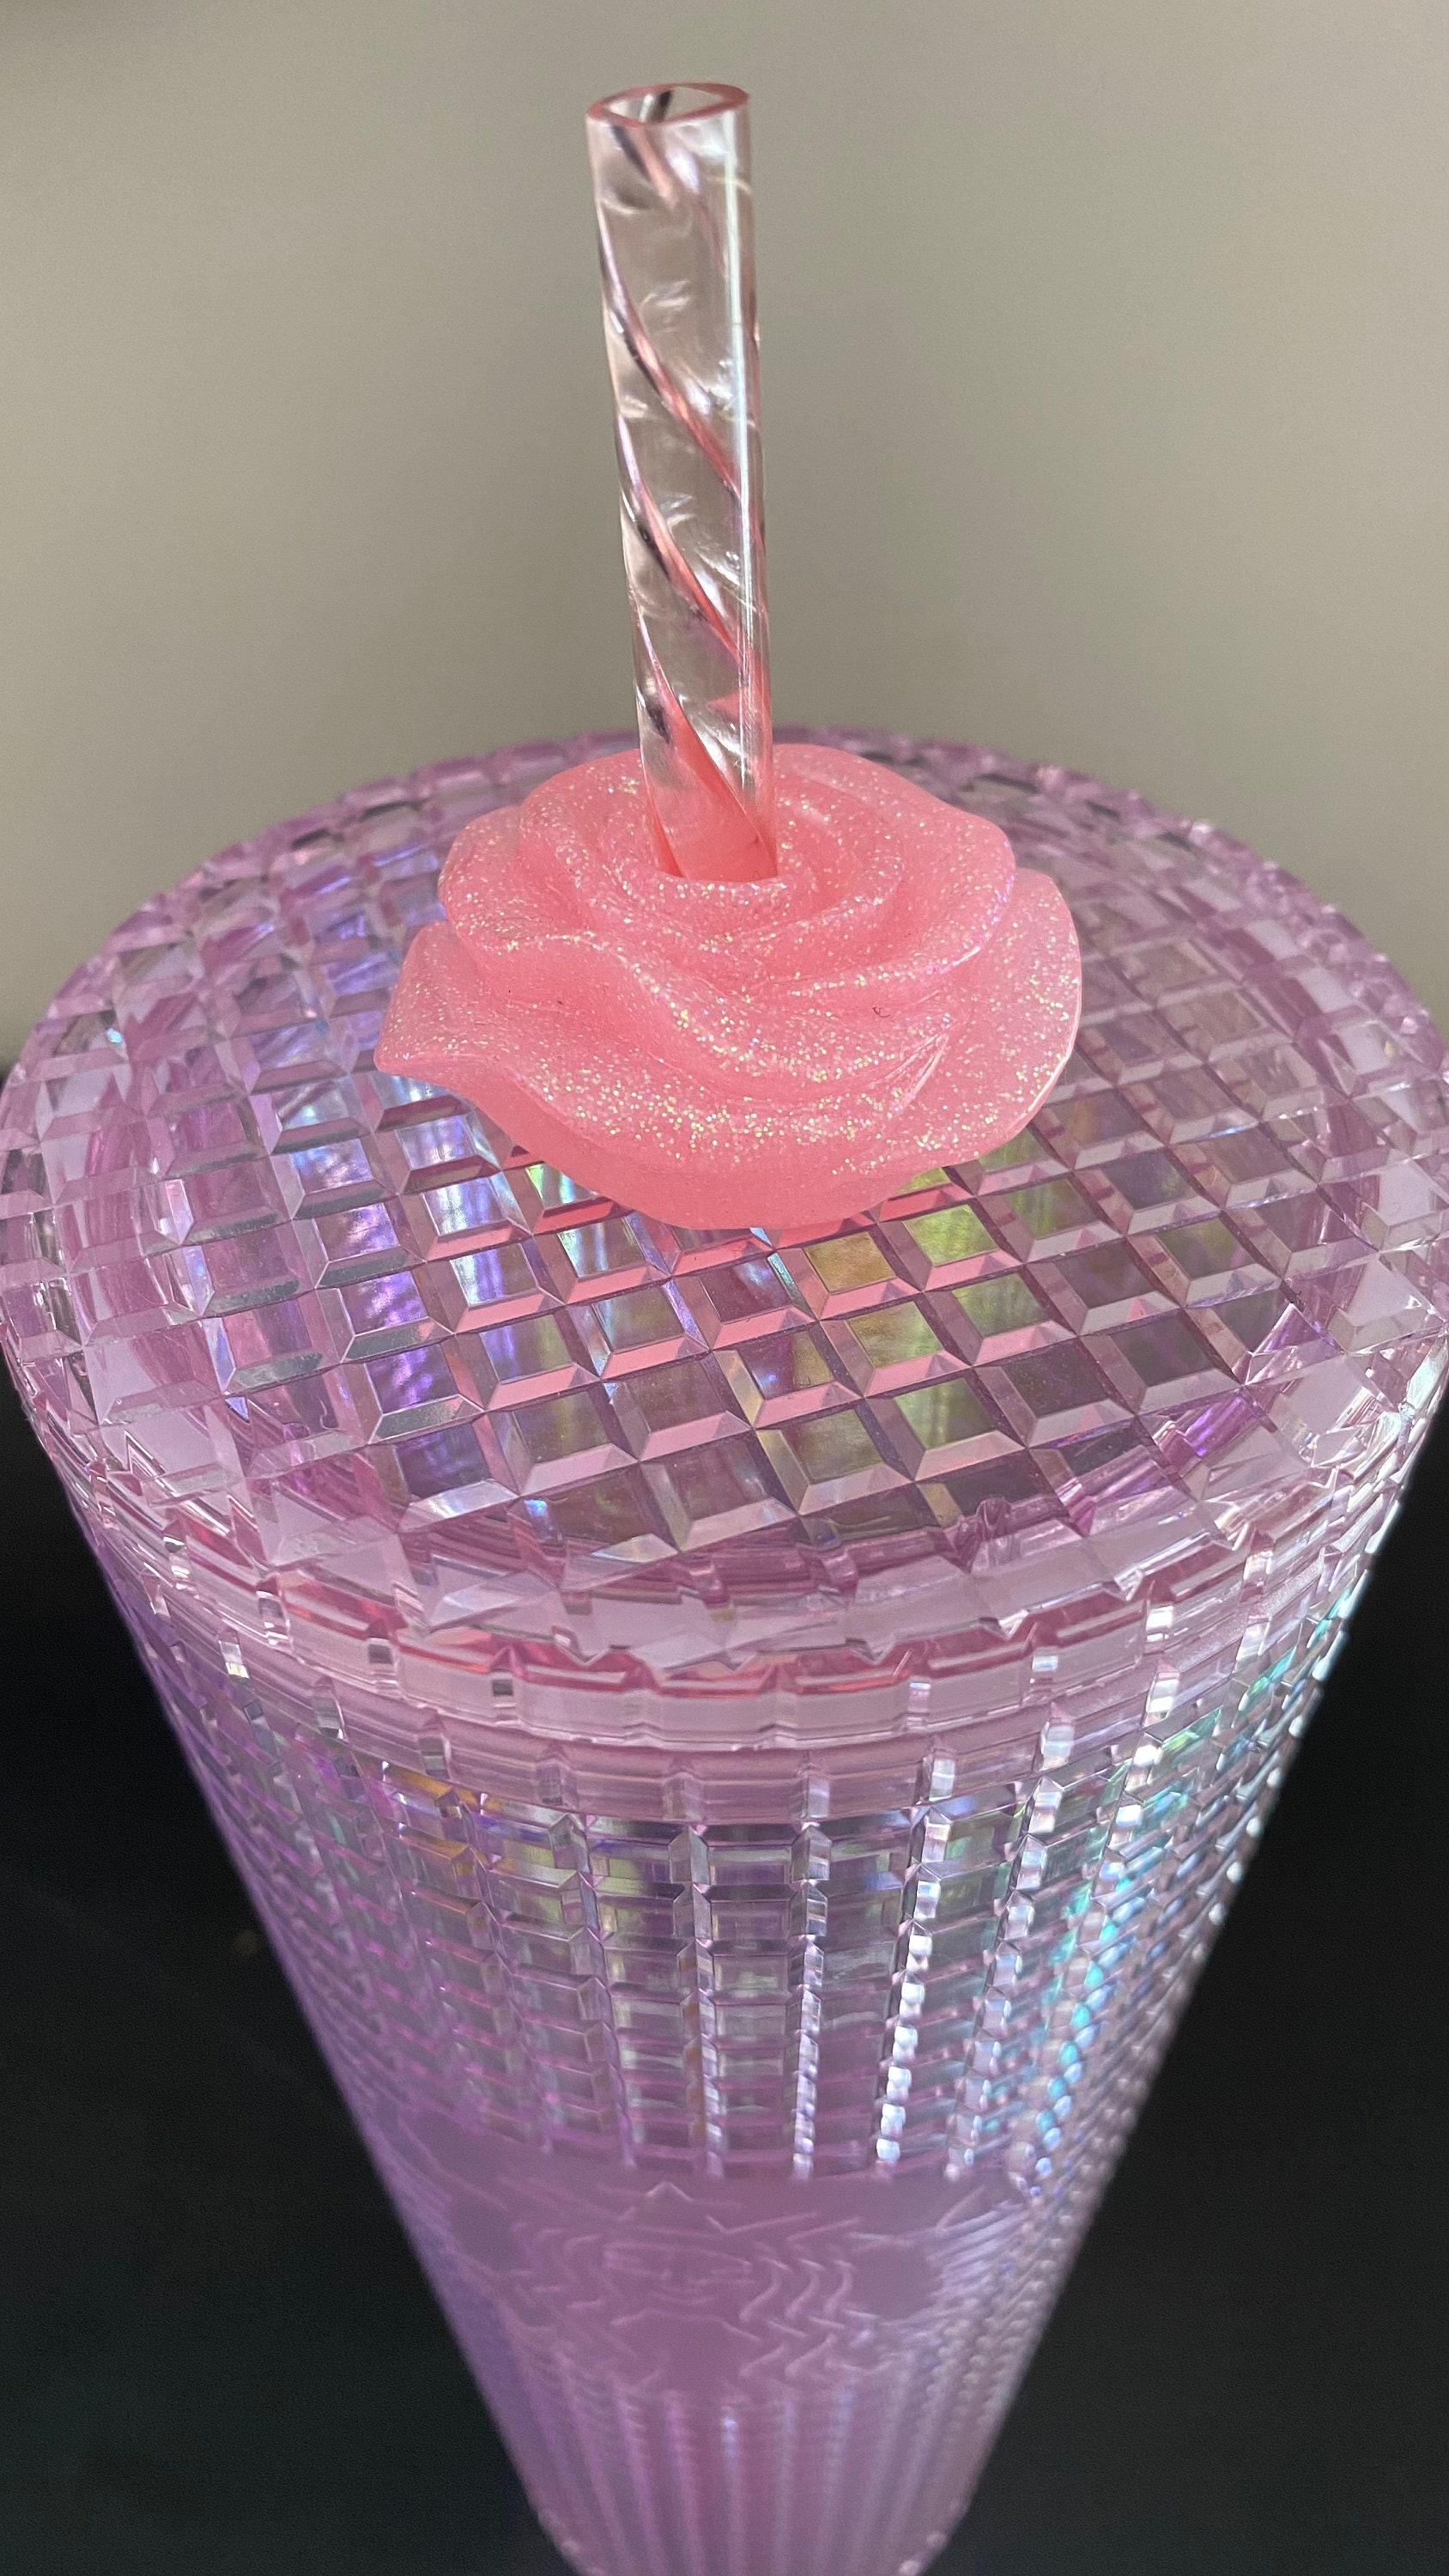 Football Straw Topper Tip Cover – Glamorous Glitzy Bling Boutique